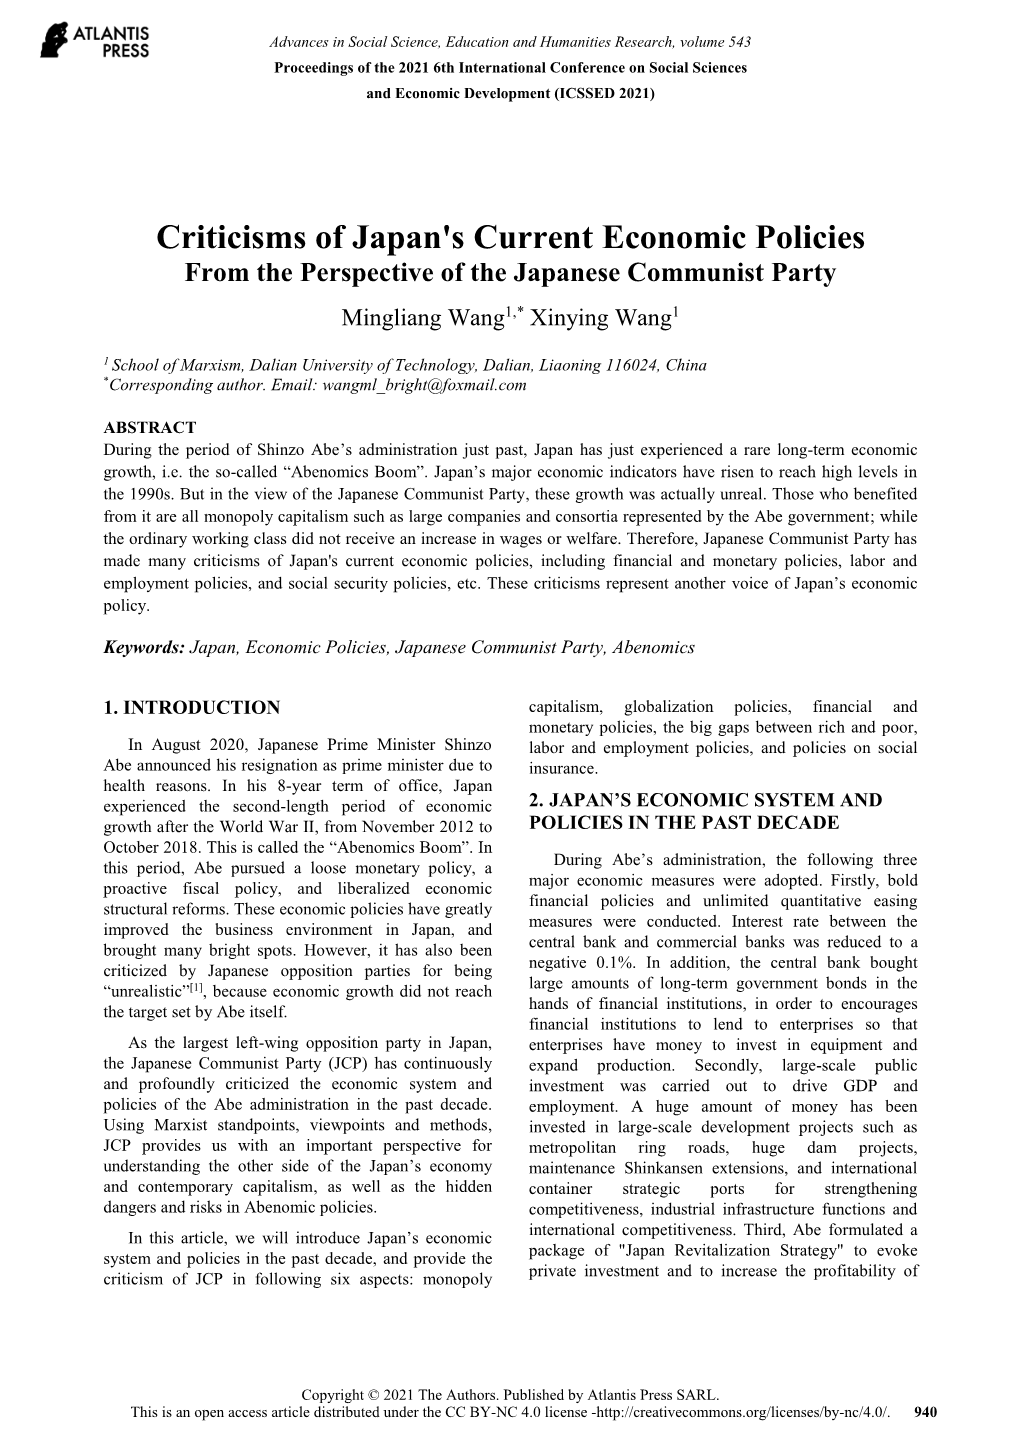 Criticisms of Japan's Current Economic Policies from the Perspective of the Japanese Communist Party Mingliang Wang1,* Xinying Wang1